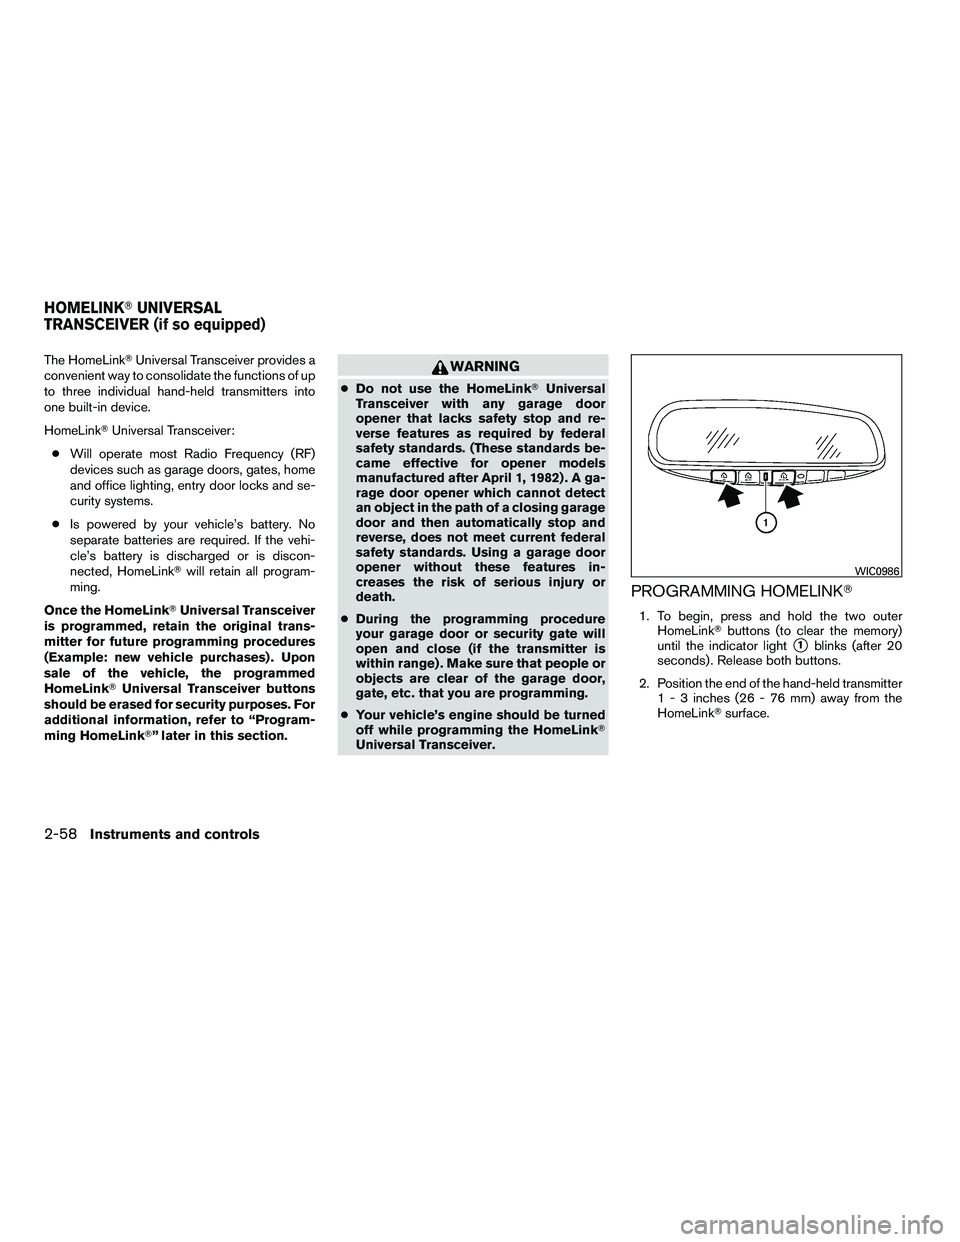 NISSAN ARMADA 2010  Owners Manual The HomeLinkUniversal Transceiver provides a
convenient way to consolidate the functions of up
to three individual hand-held transmitters into
one built-in device.
HomeLink Universal Transceiver:
�